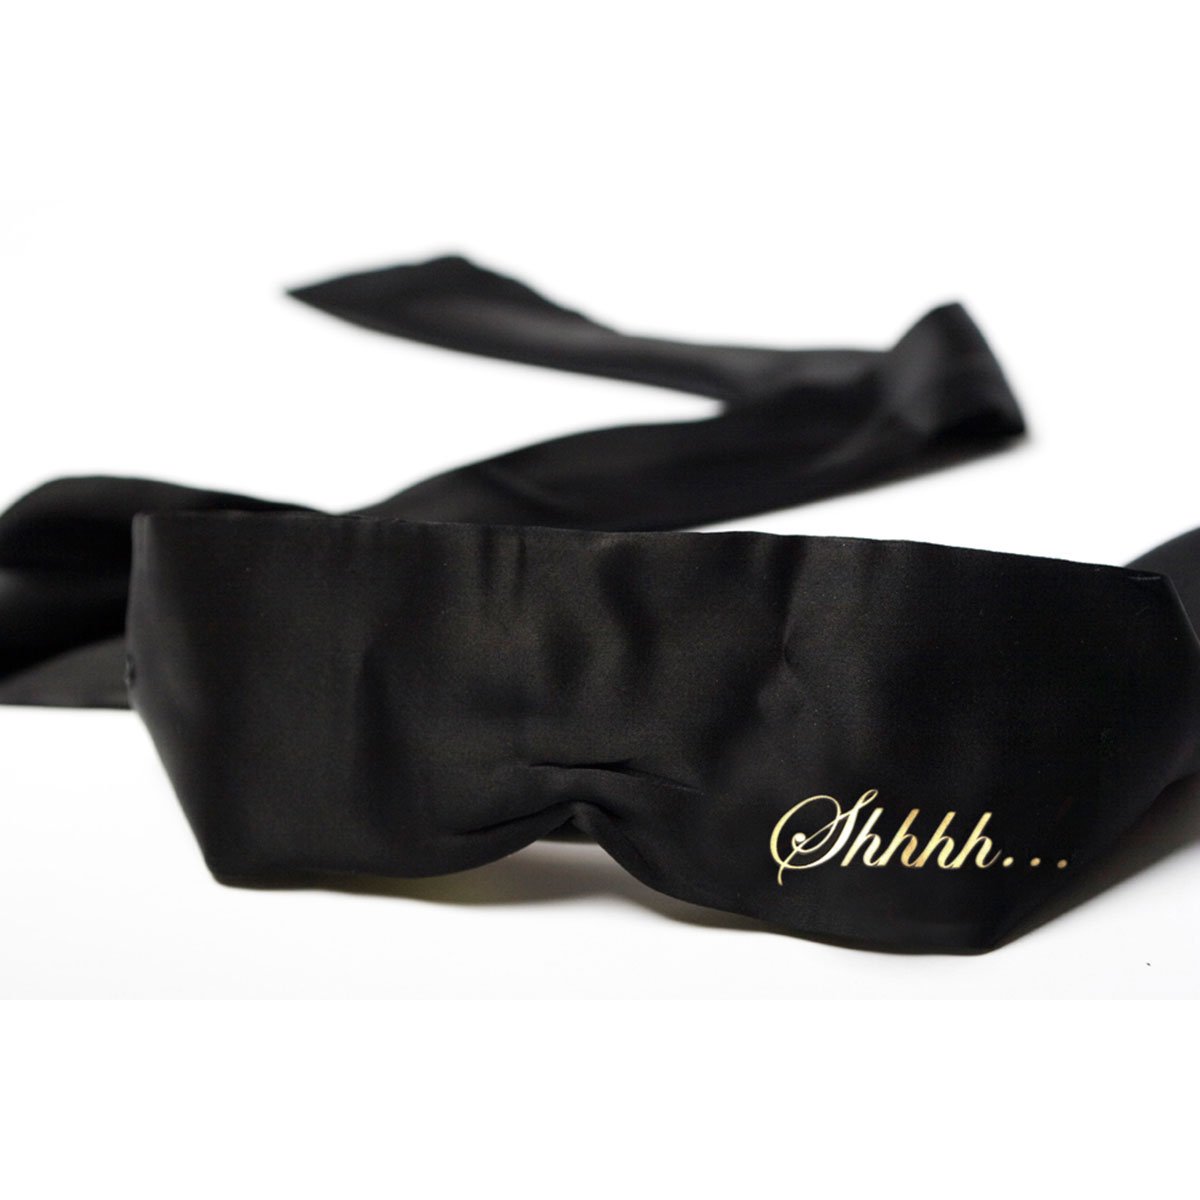 Bijoux Indiscrets Shhh Satin Blindfold - Buy At Luxury Toy X - Free 3-Day Shipping